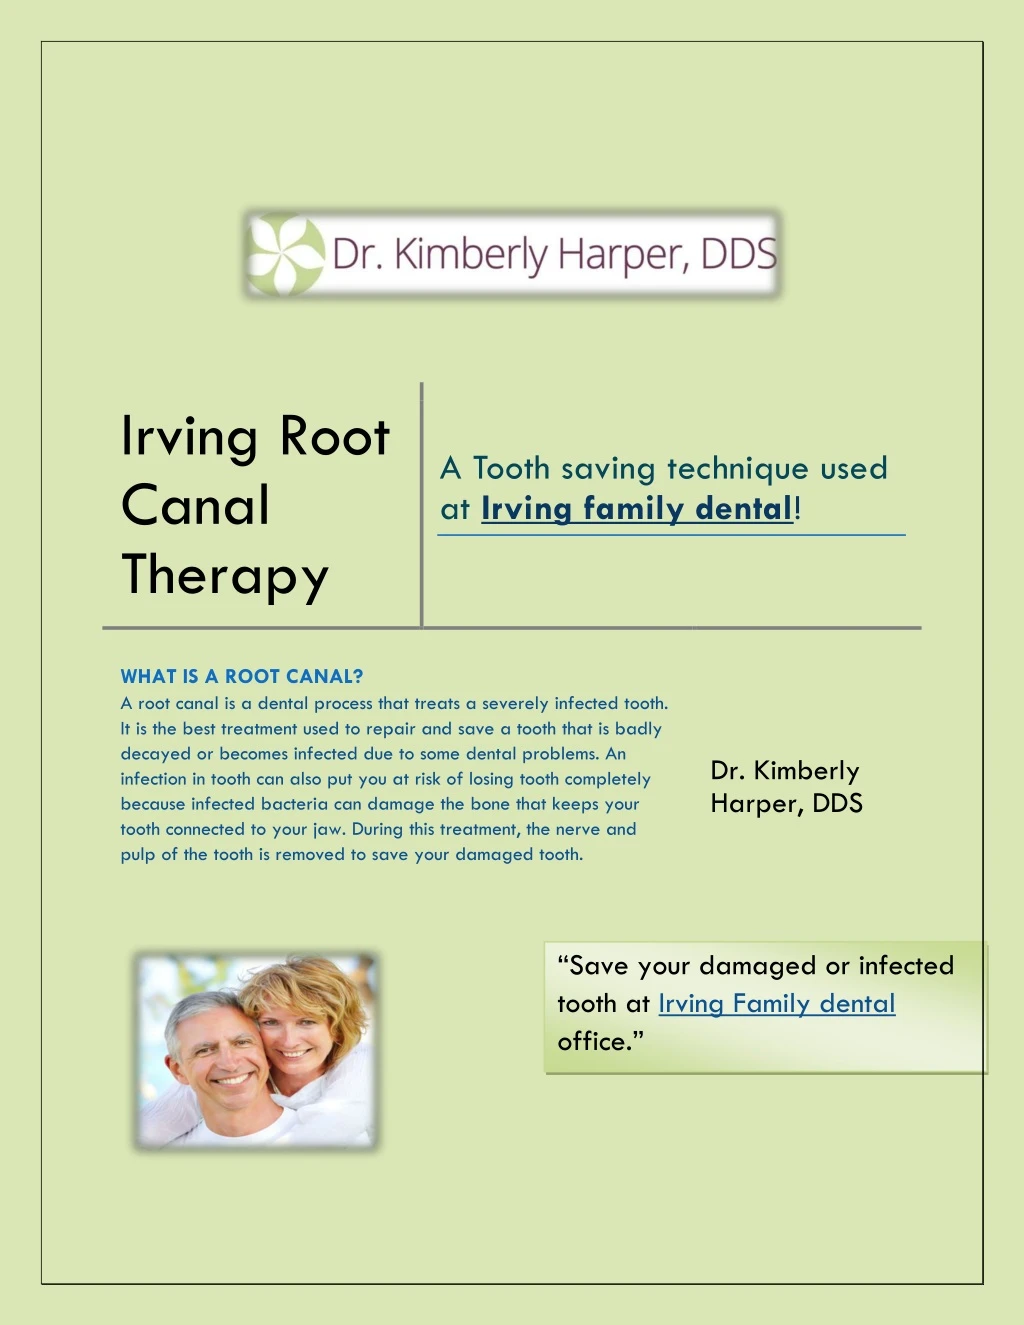 irving root canal therapy